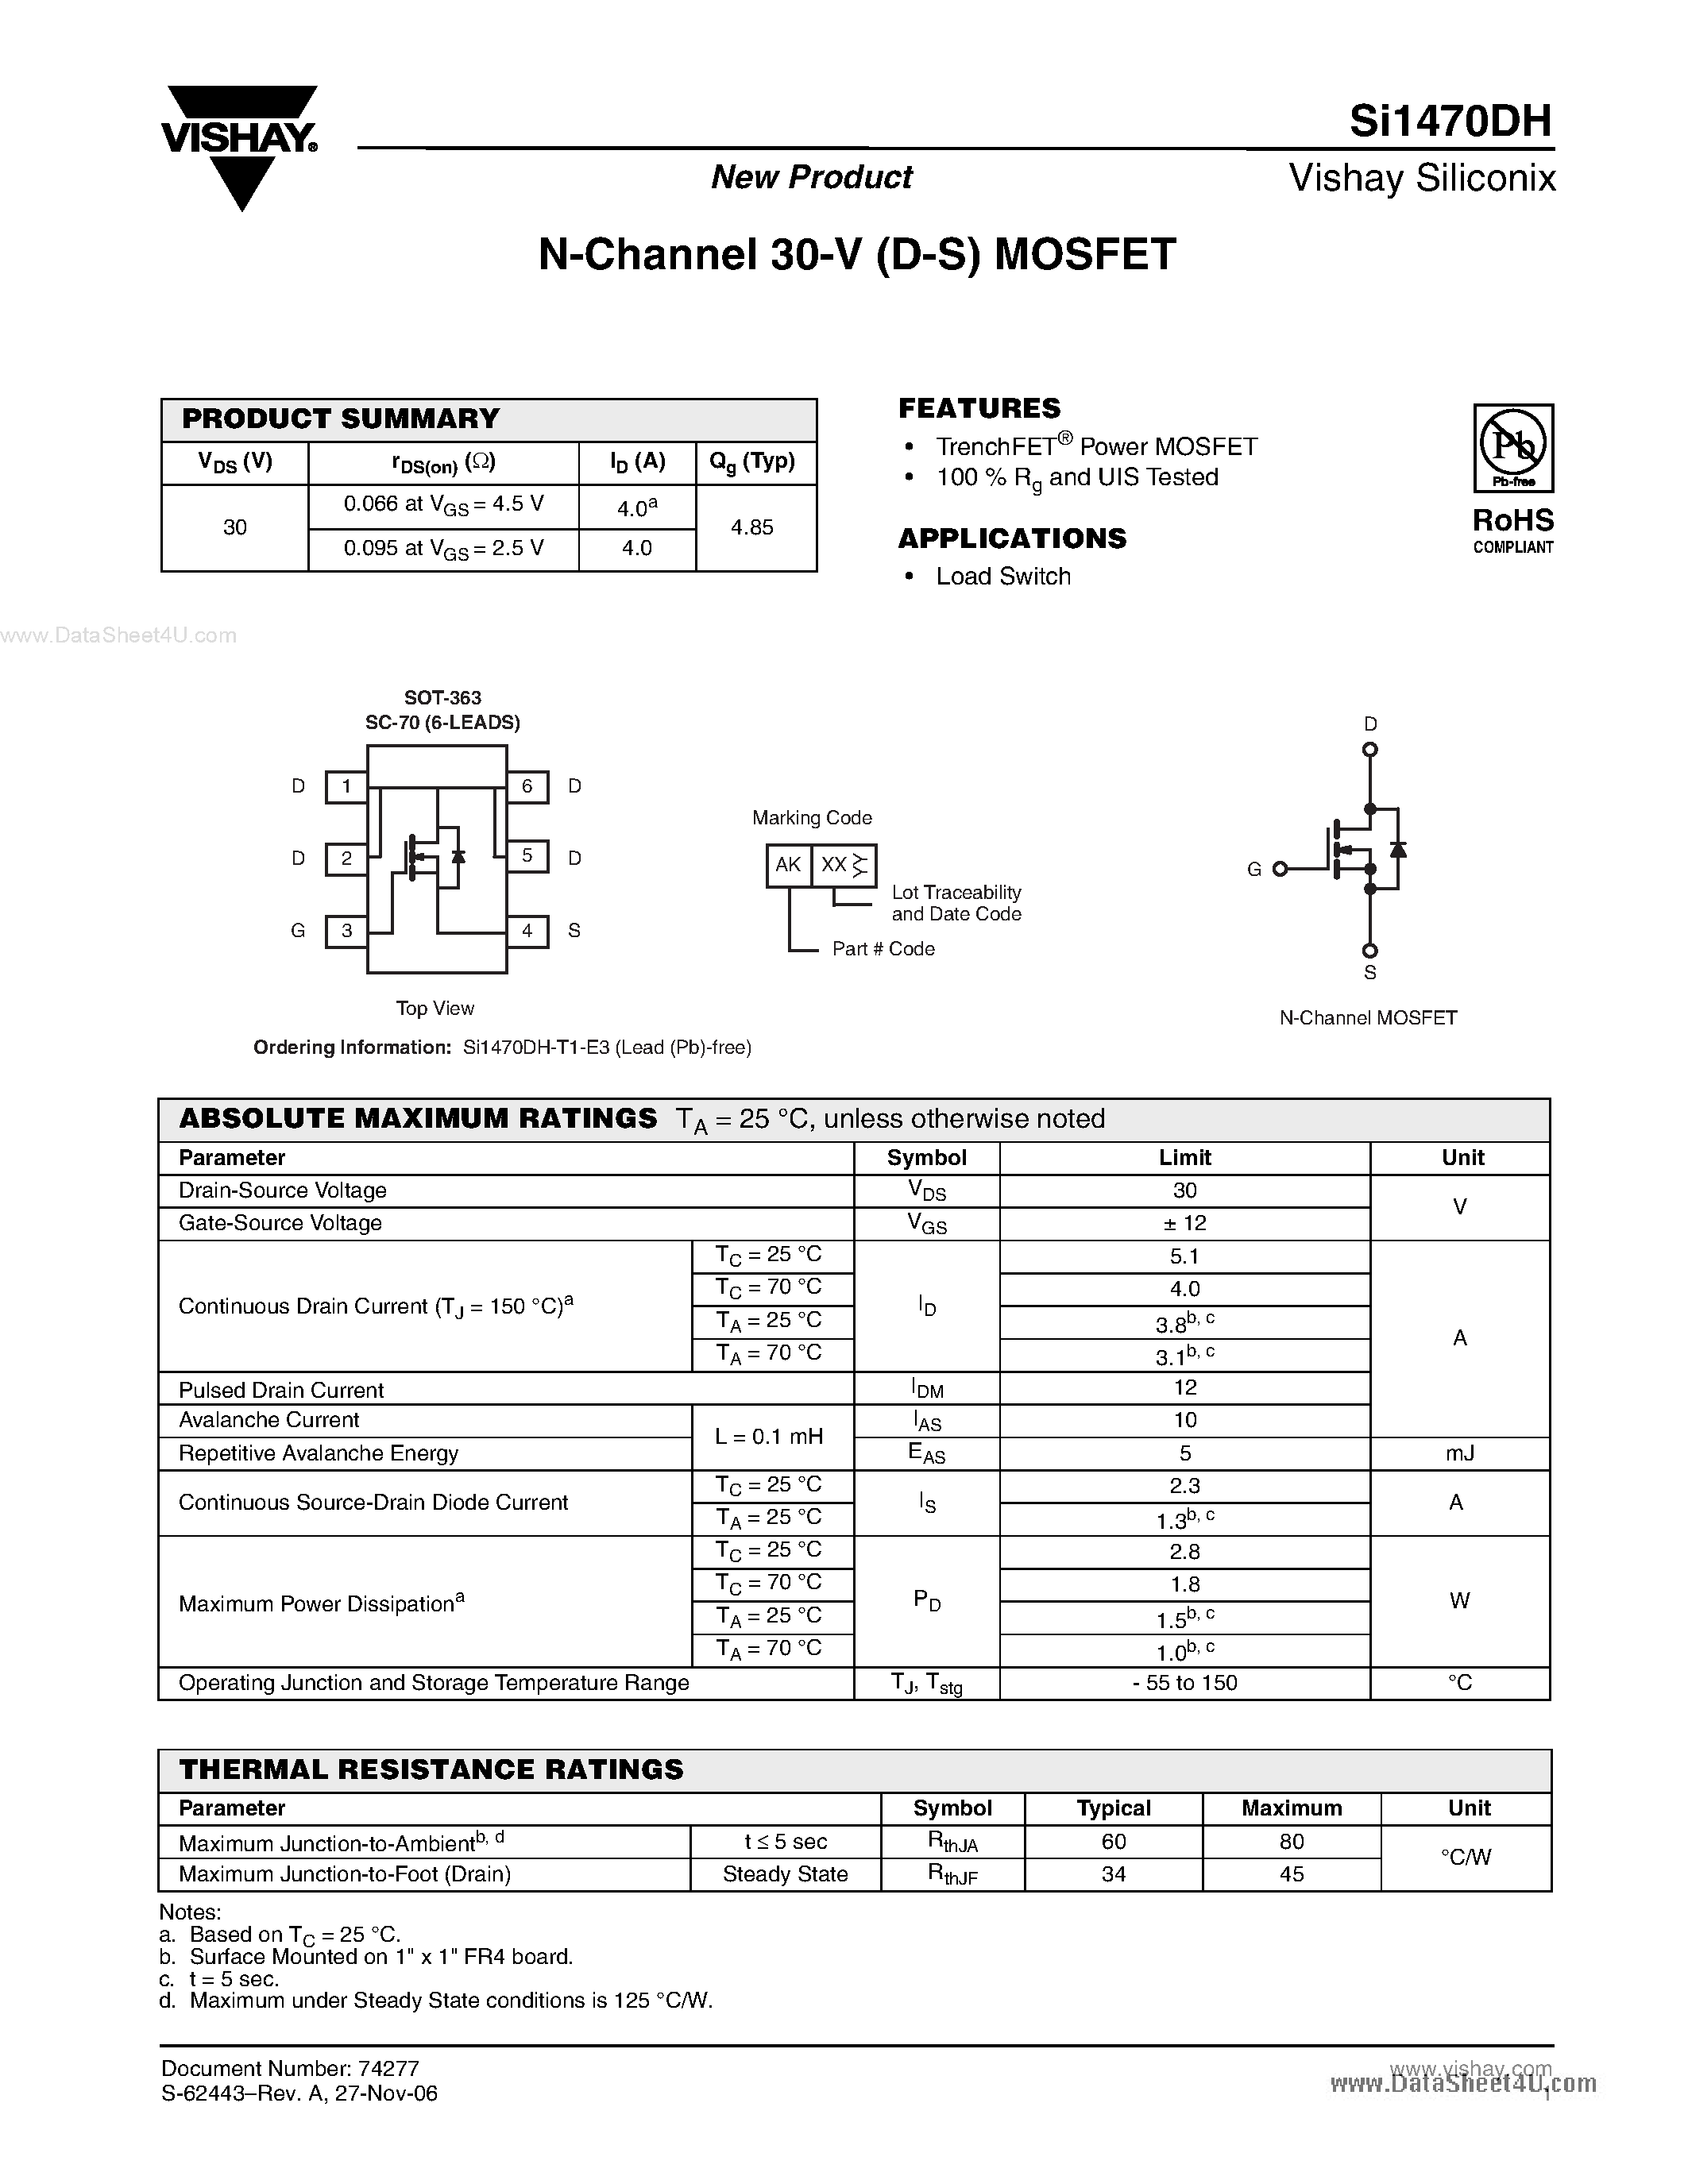 Datasheet SI1470DH - N-Channel MOSFET page 1